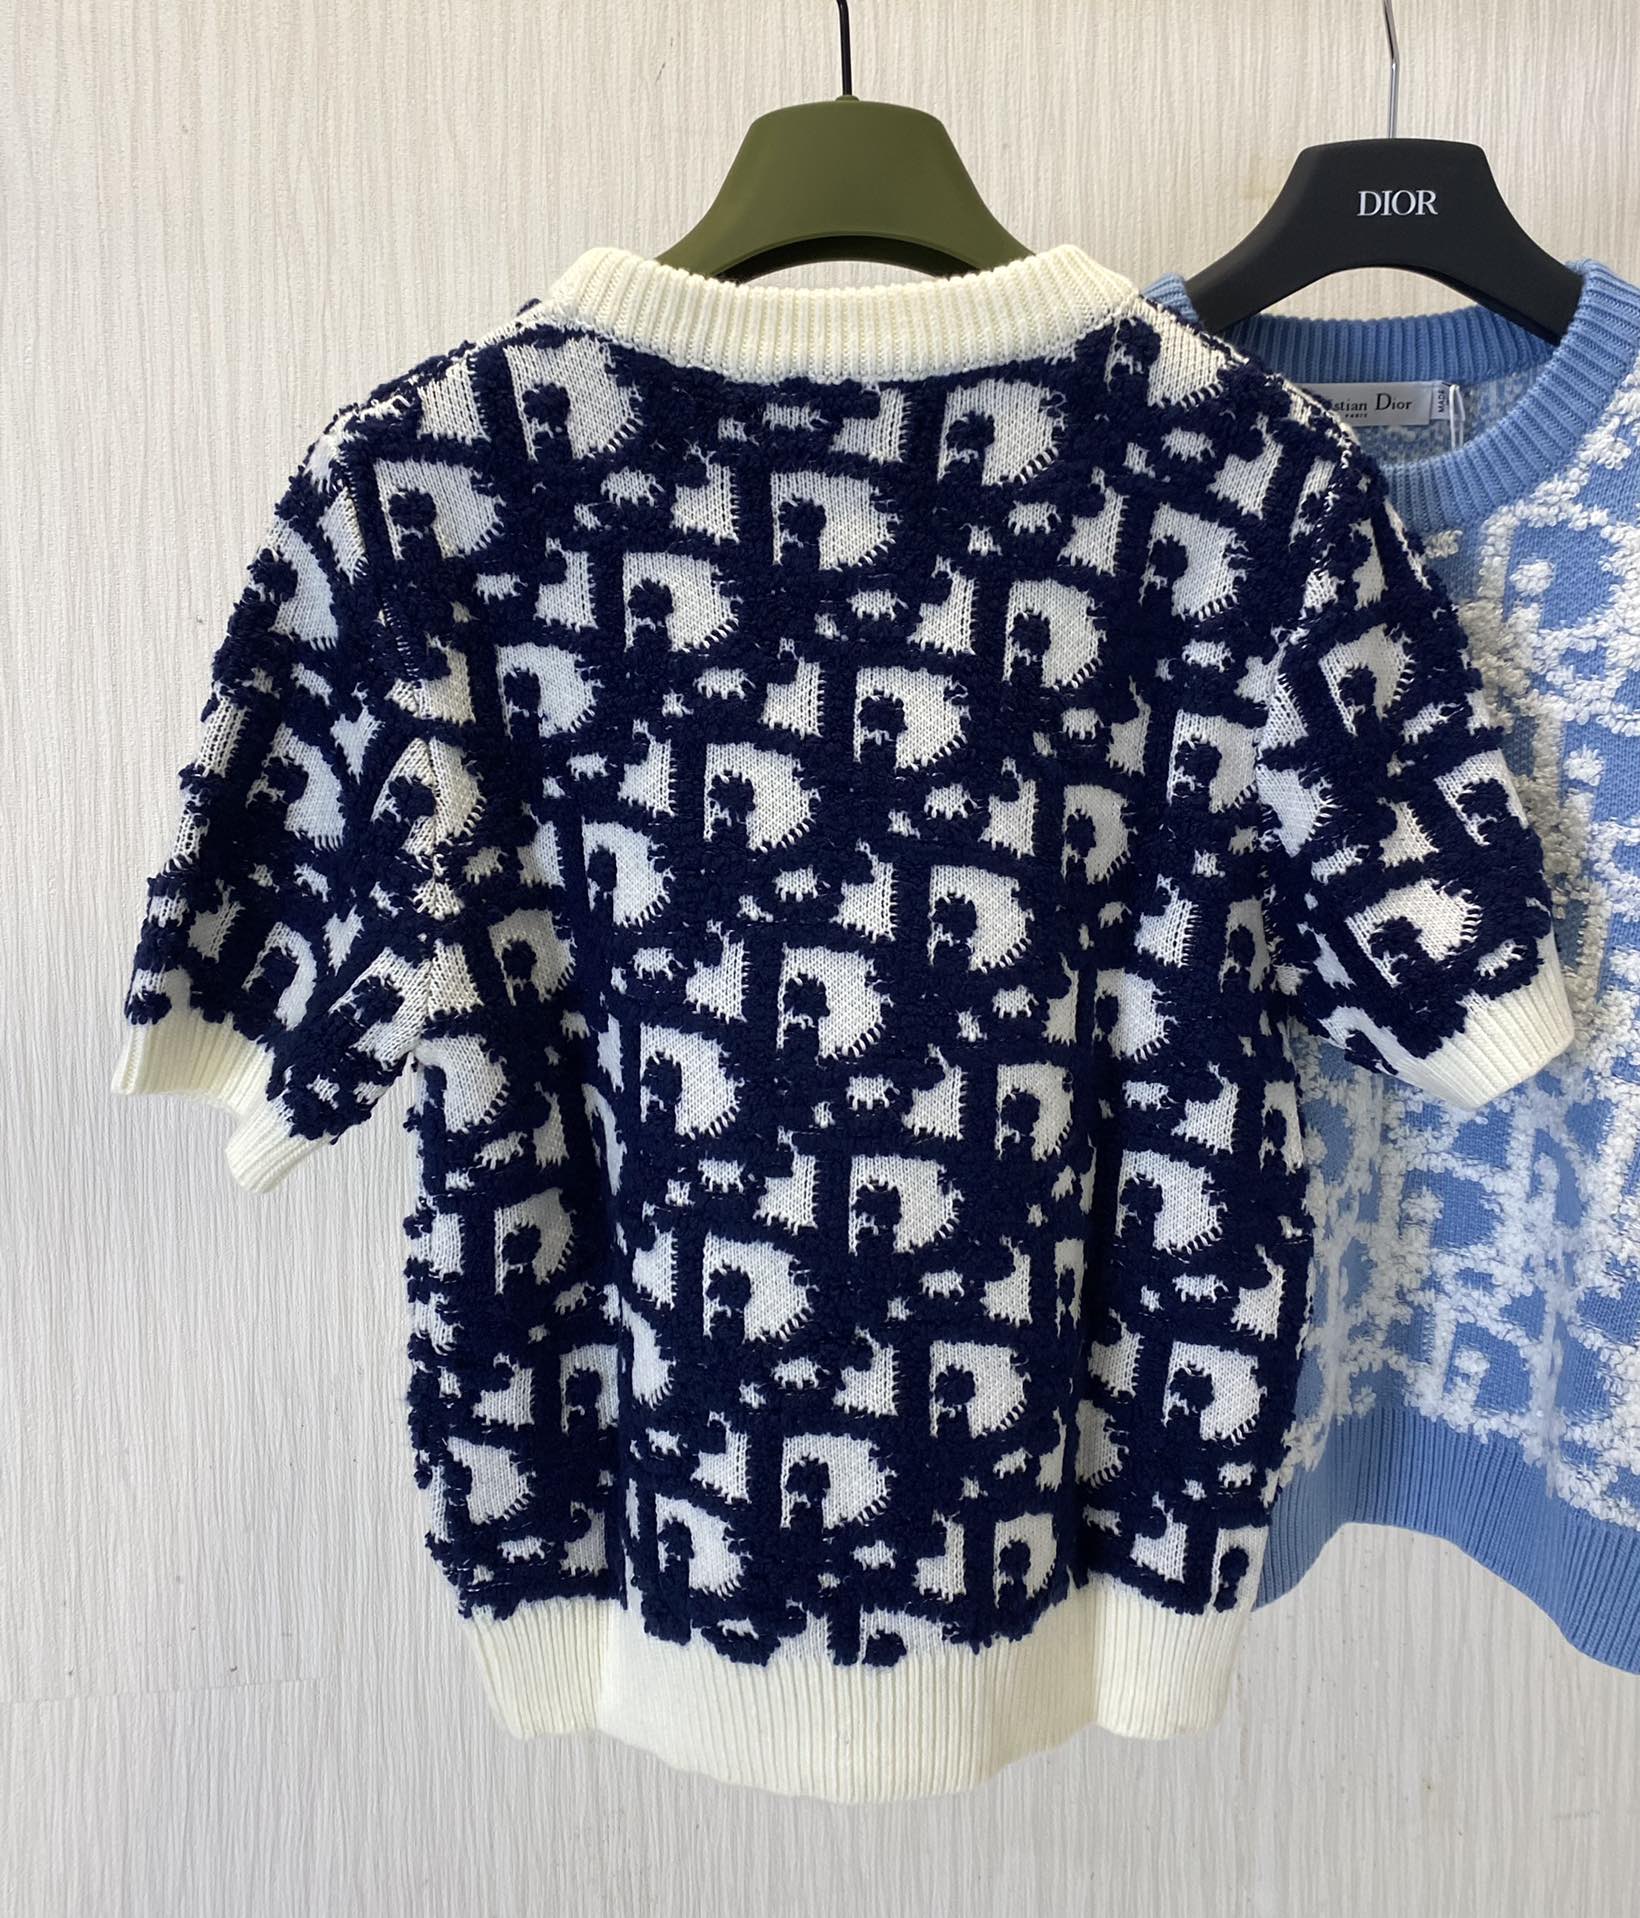 Replica DIOR Vintage Holiday Time Blue/White Floral Print Pullover Sweater size Large